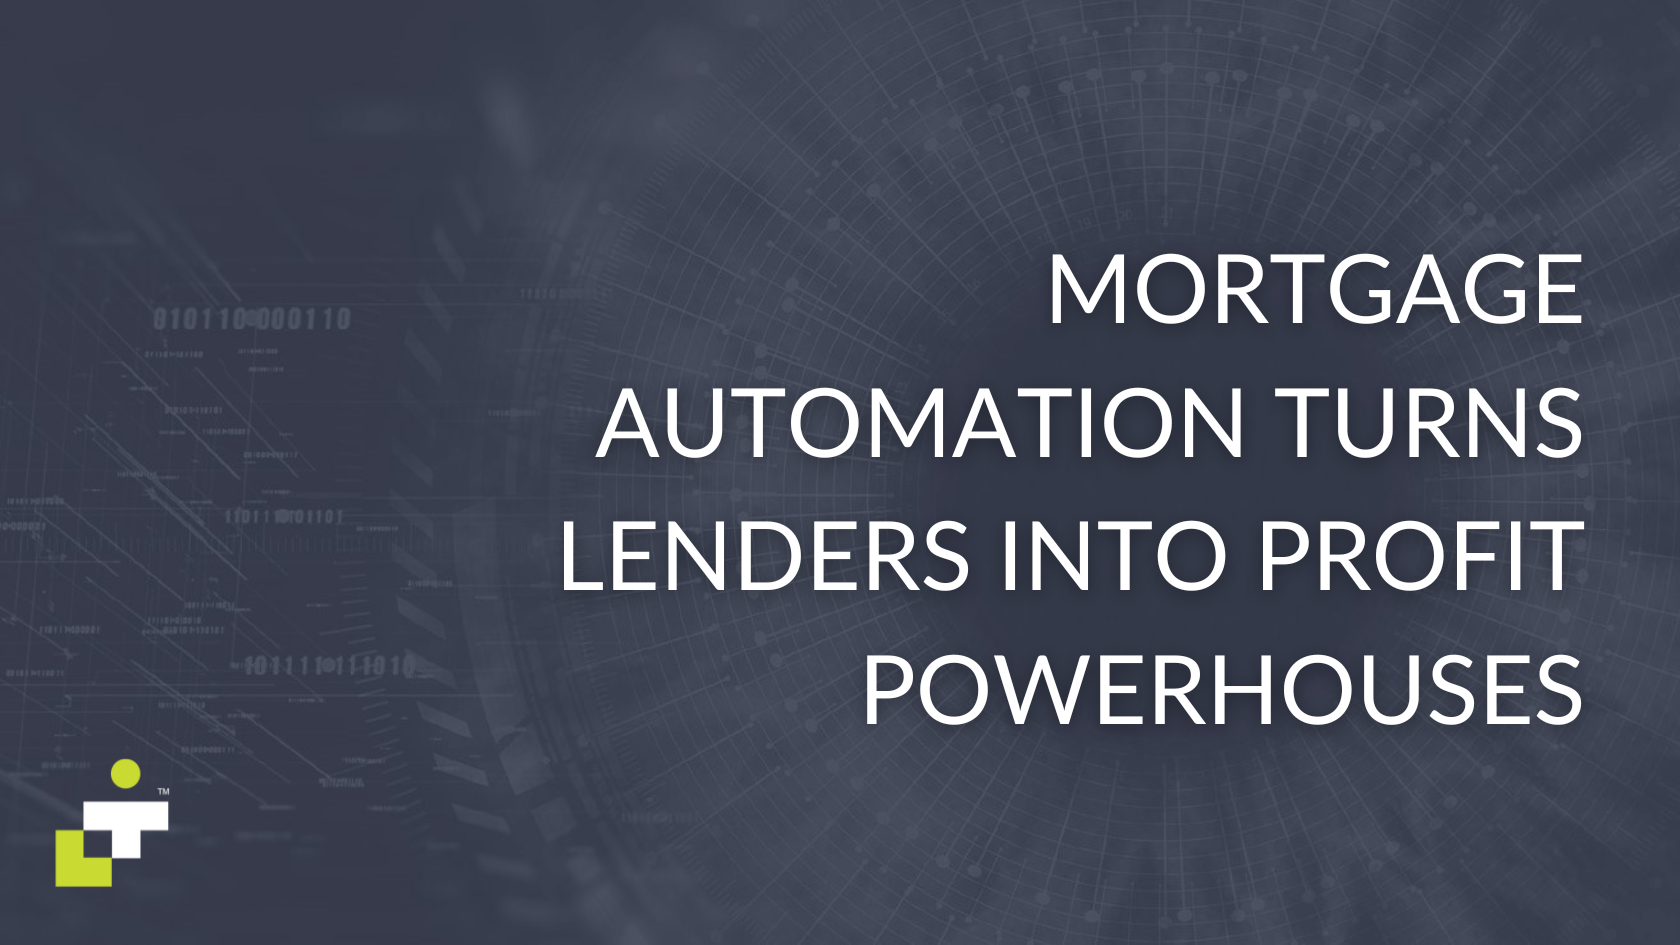 Mortgage Automation Turns Lenders into Profit Powerhouses